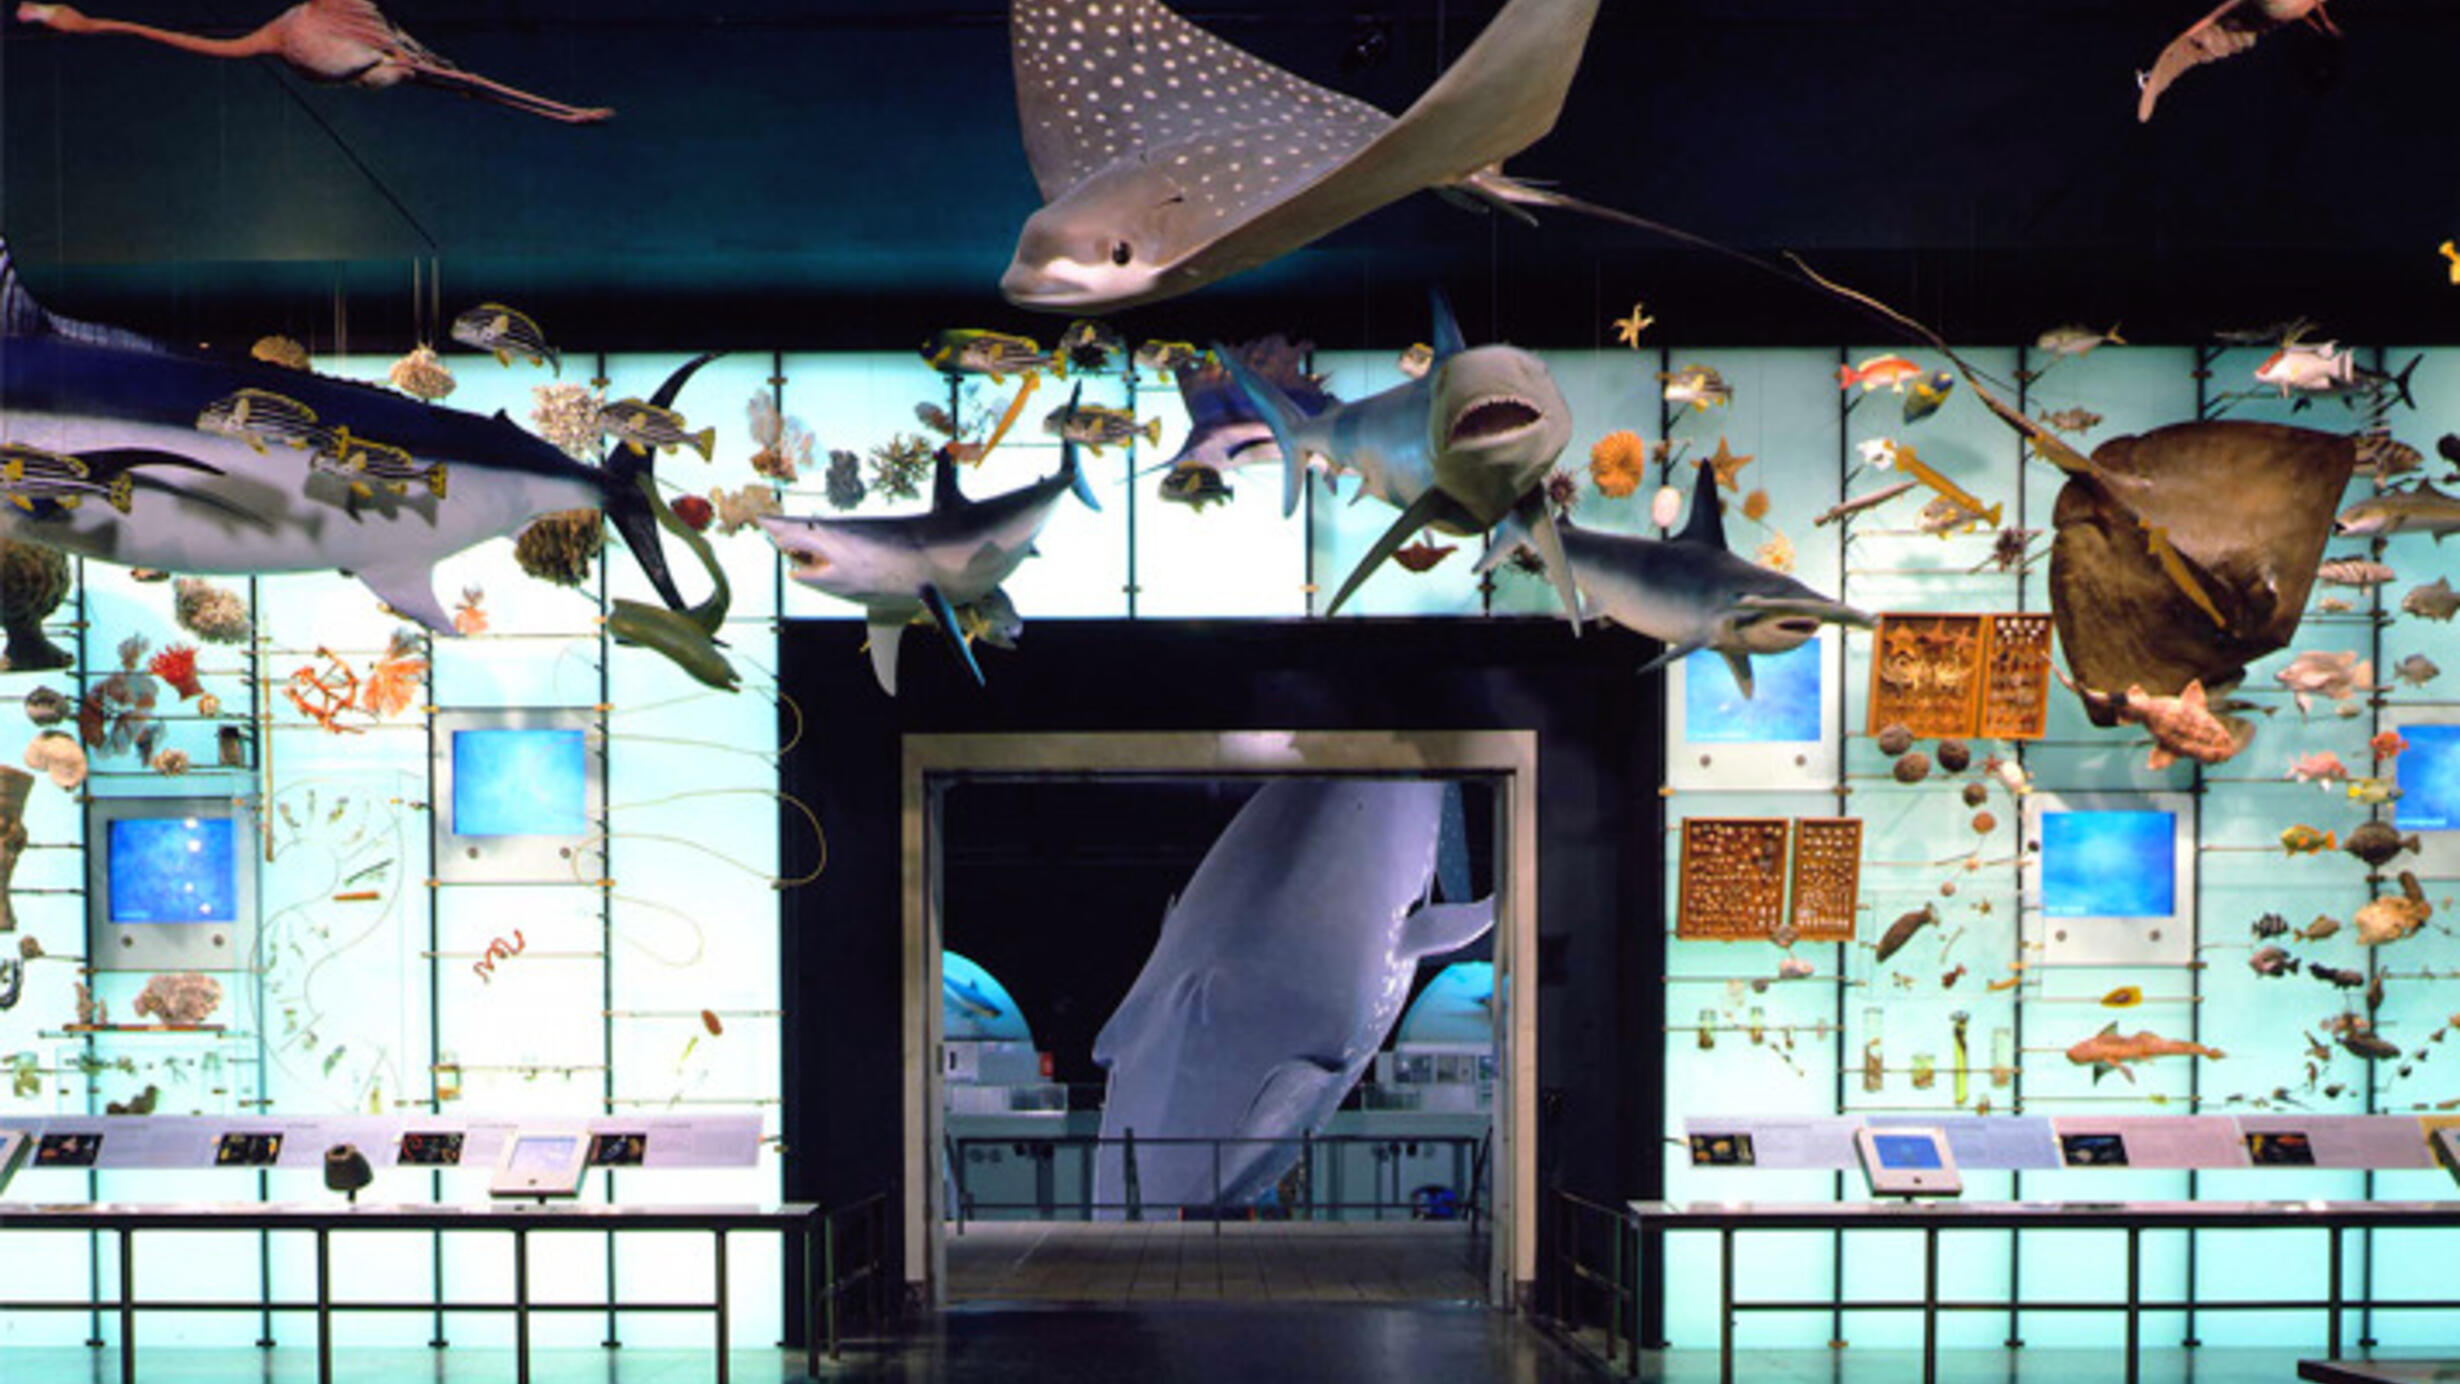 A view of the Museum's Hall of Biodiversity's Spectrum of Life exhibit, an illuminated wall with models and spectrum of many life forms, and a doorway into the Hall of Ocean Life with the model of the blue whale.